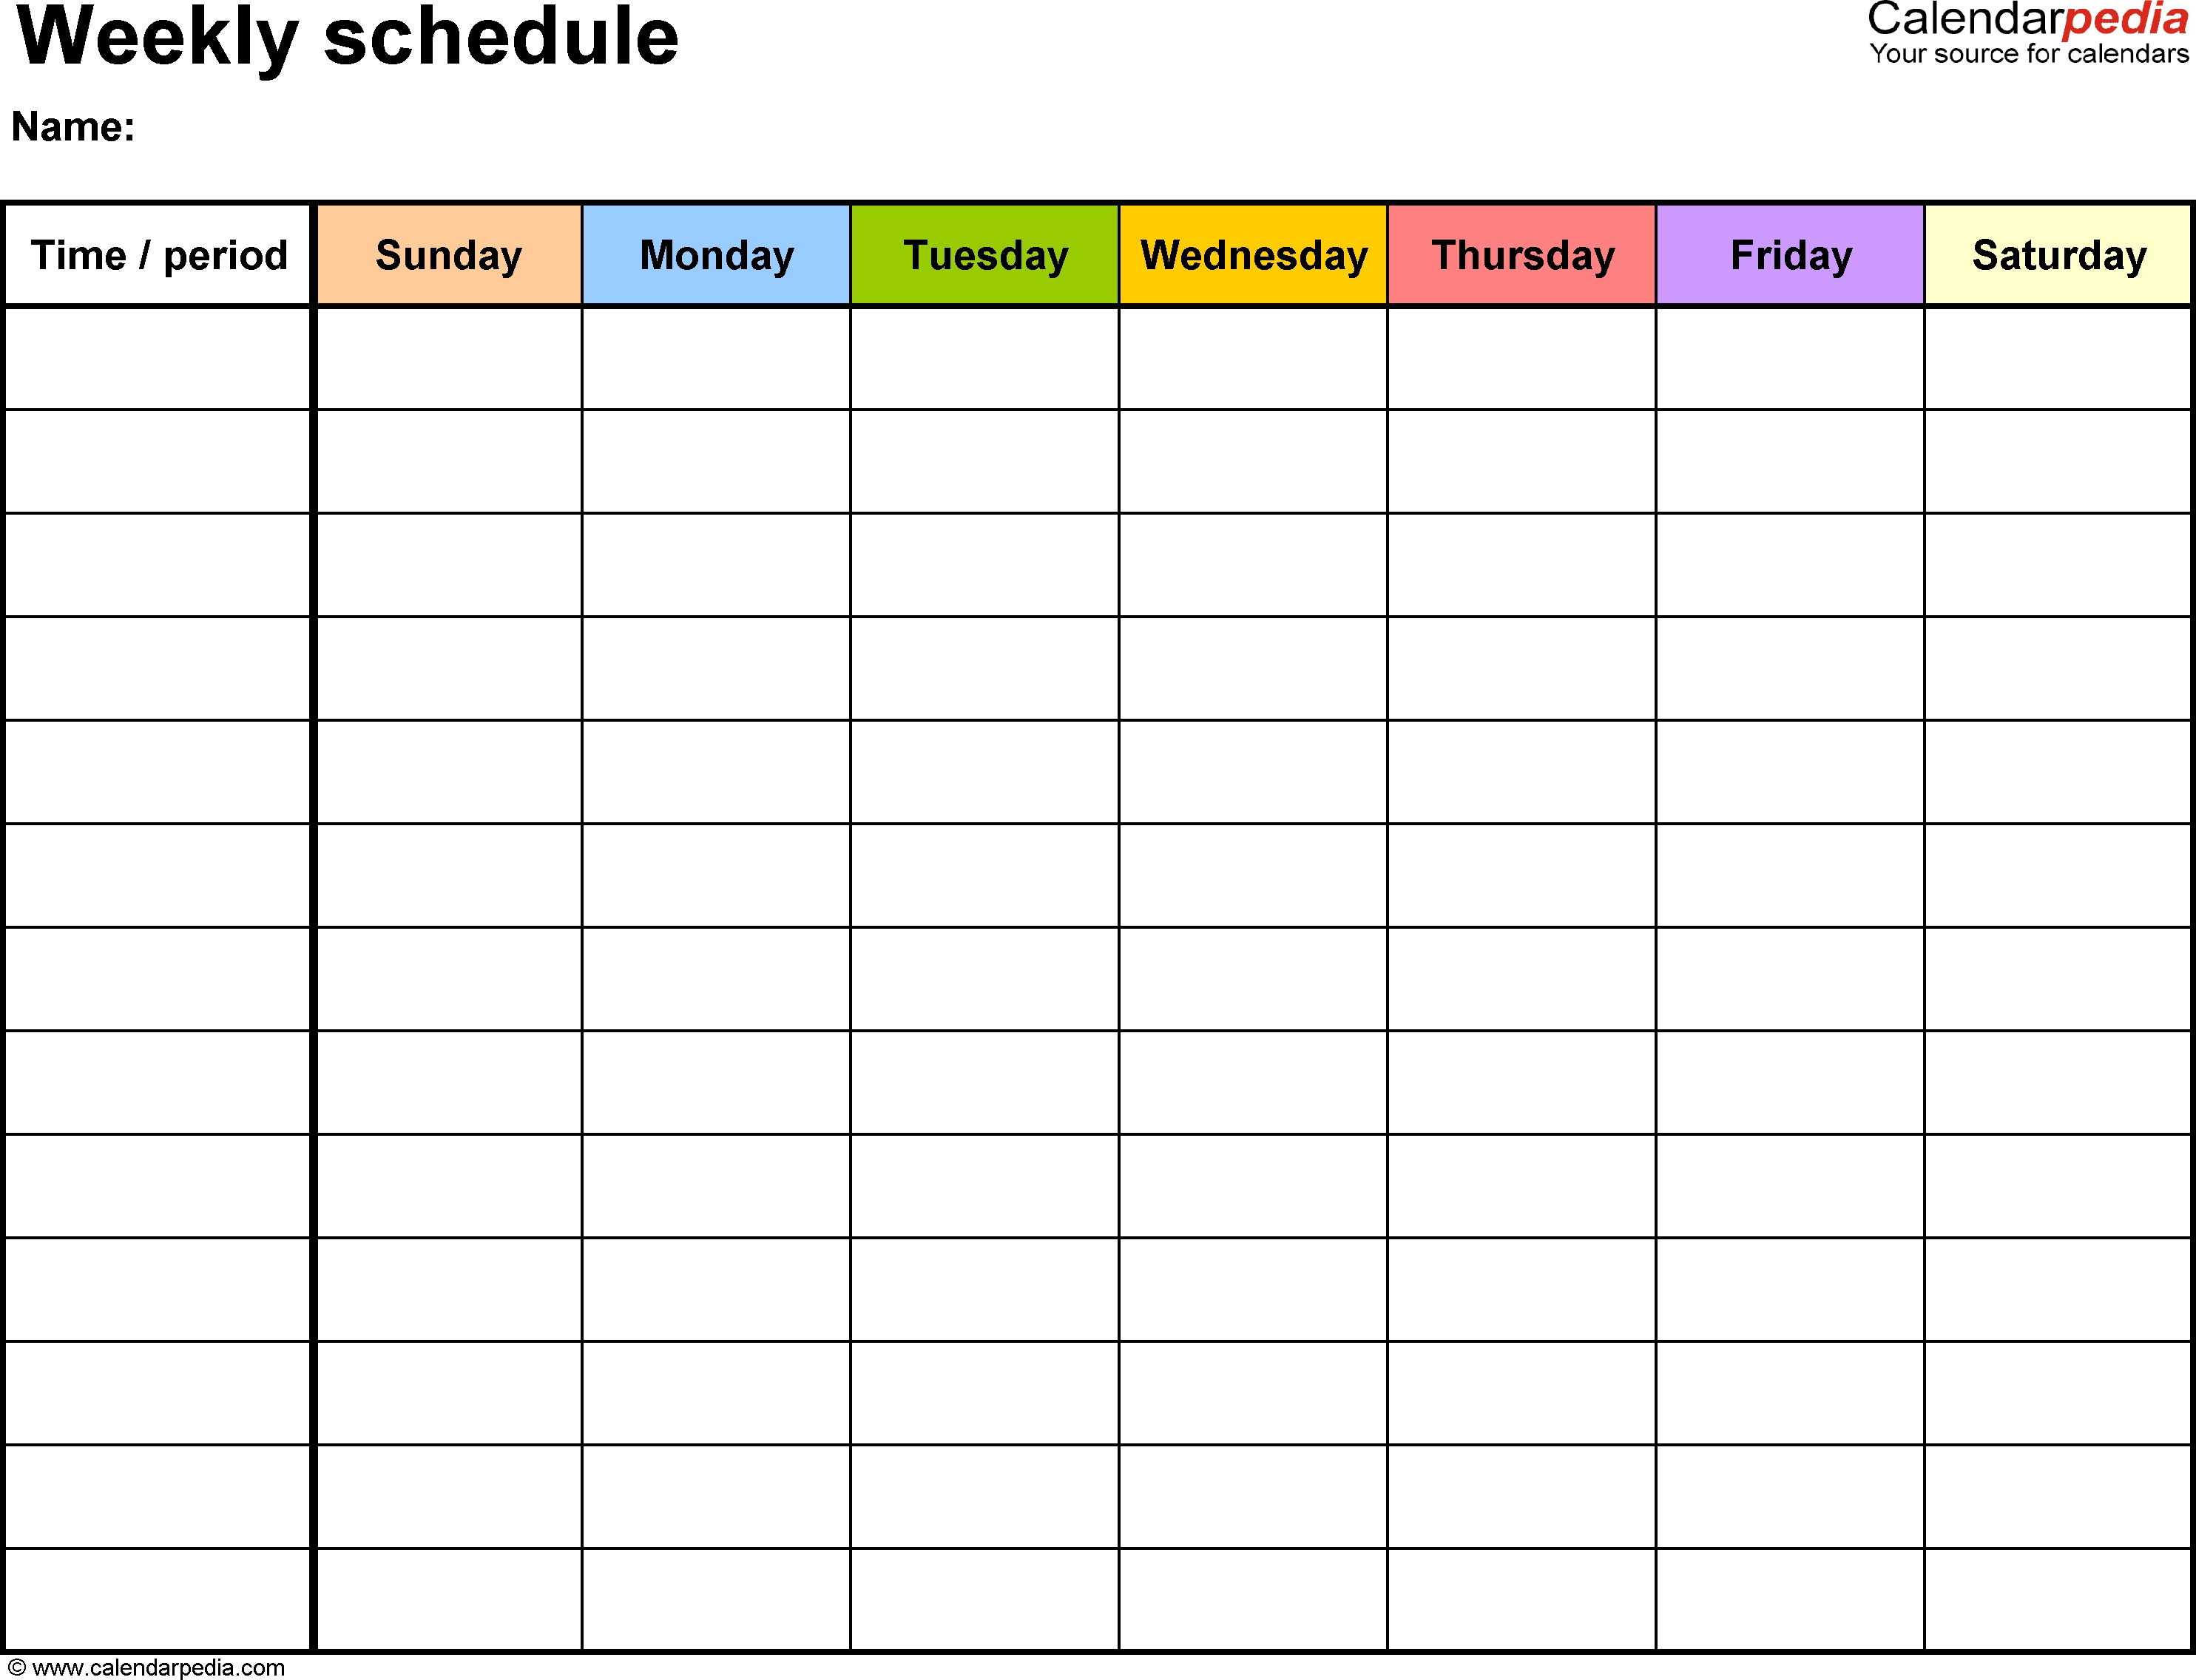 Free Weekly Schedule Templates For Excel - 18 Templates-Images Of Free Printable Calendar Templates For Kids Monday To Friday Only